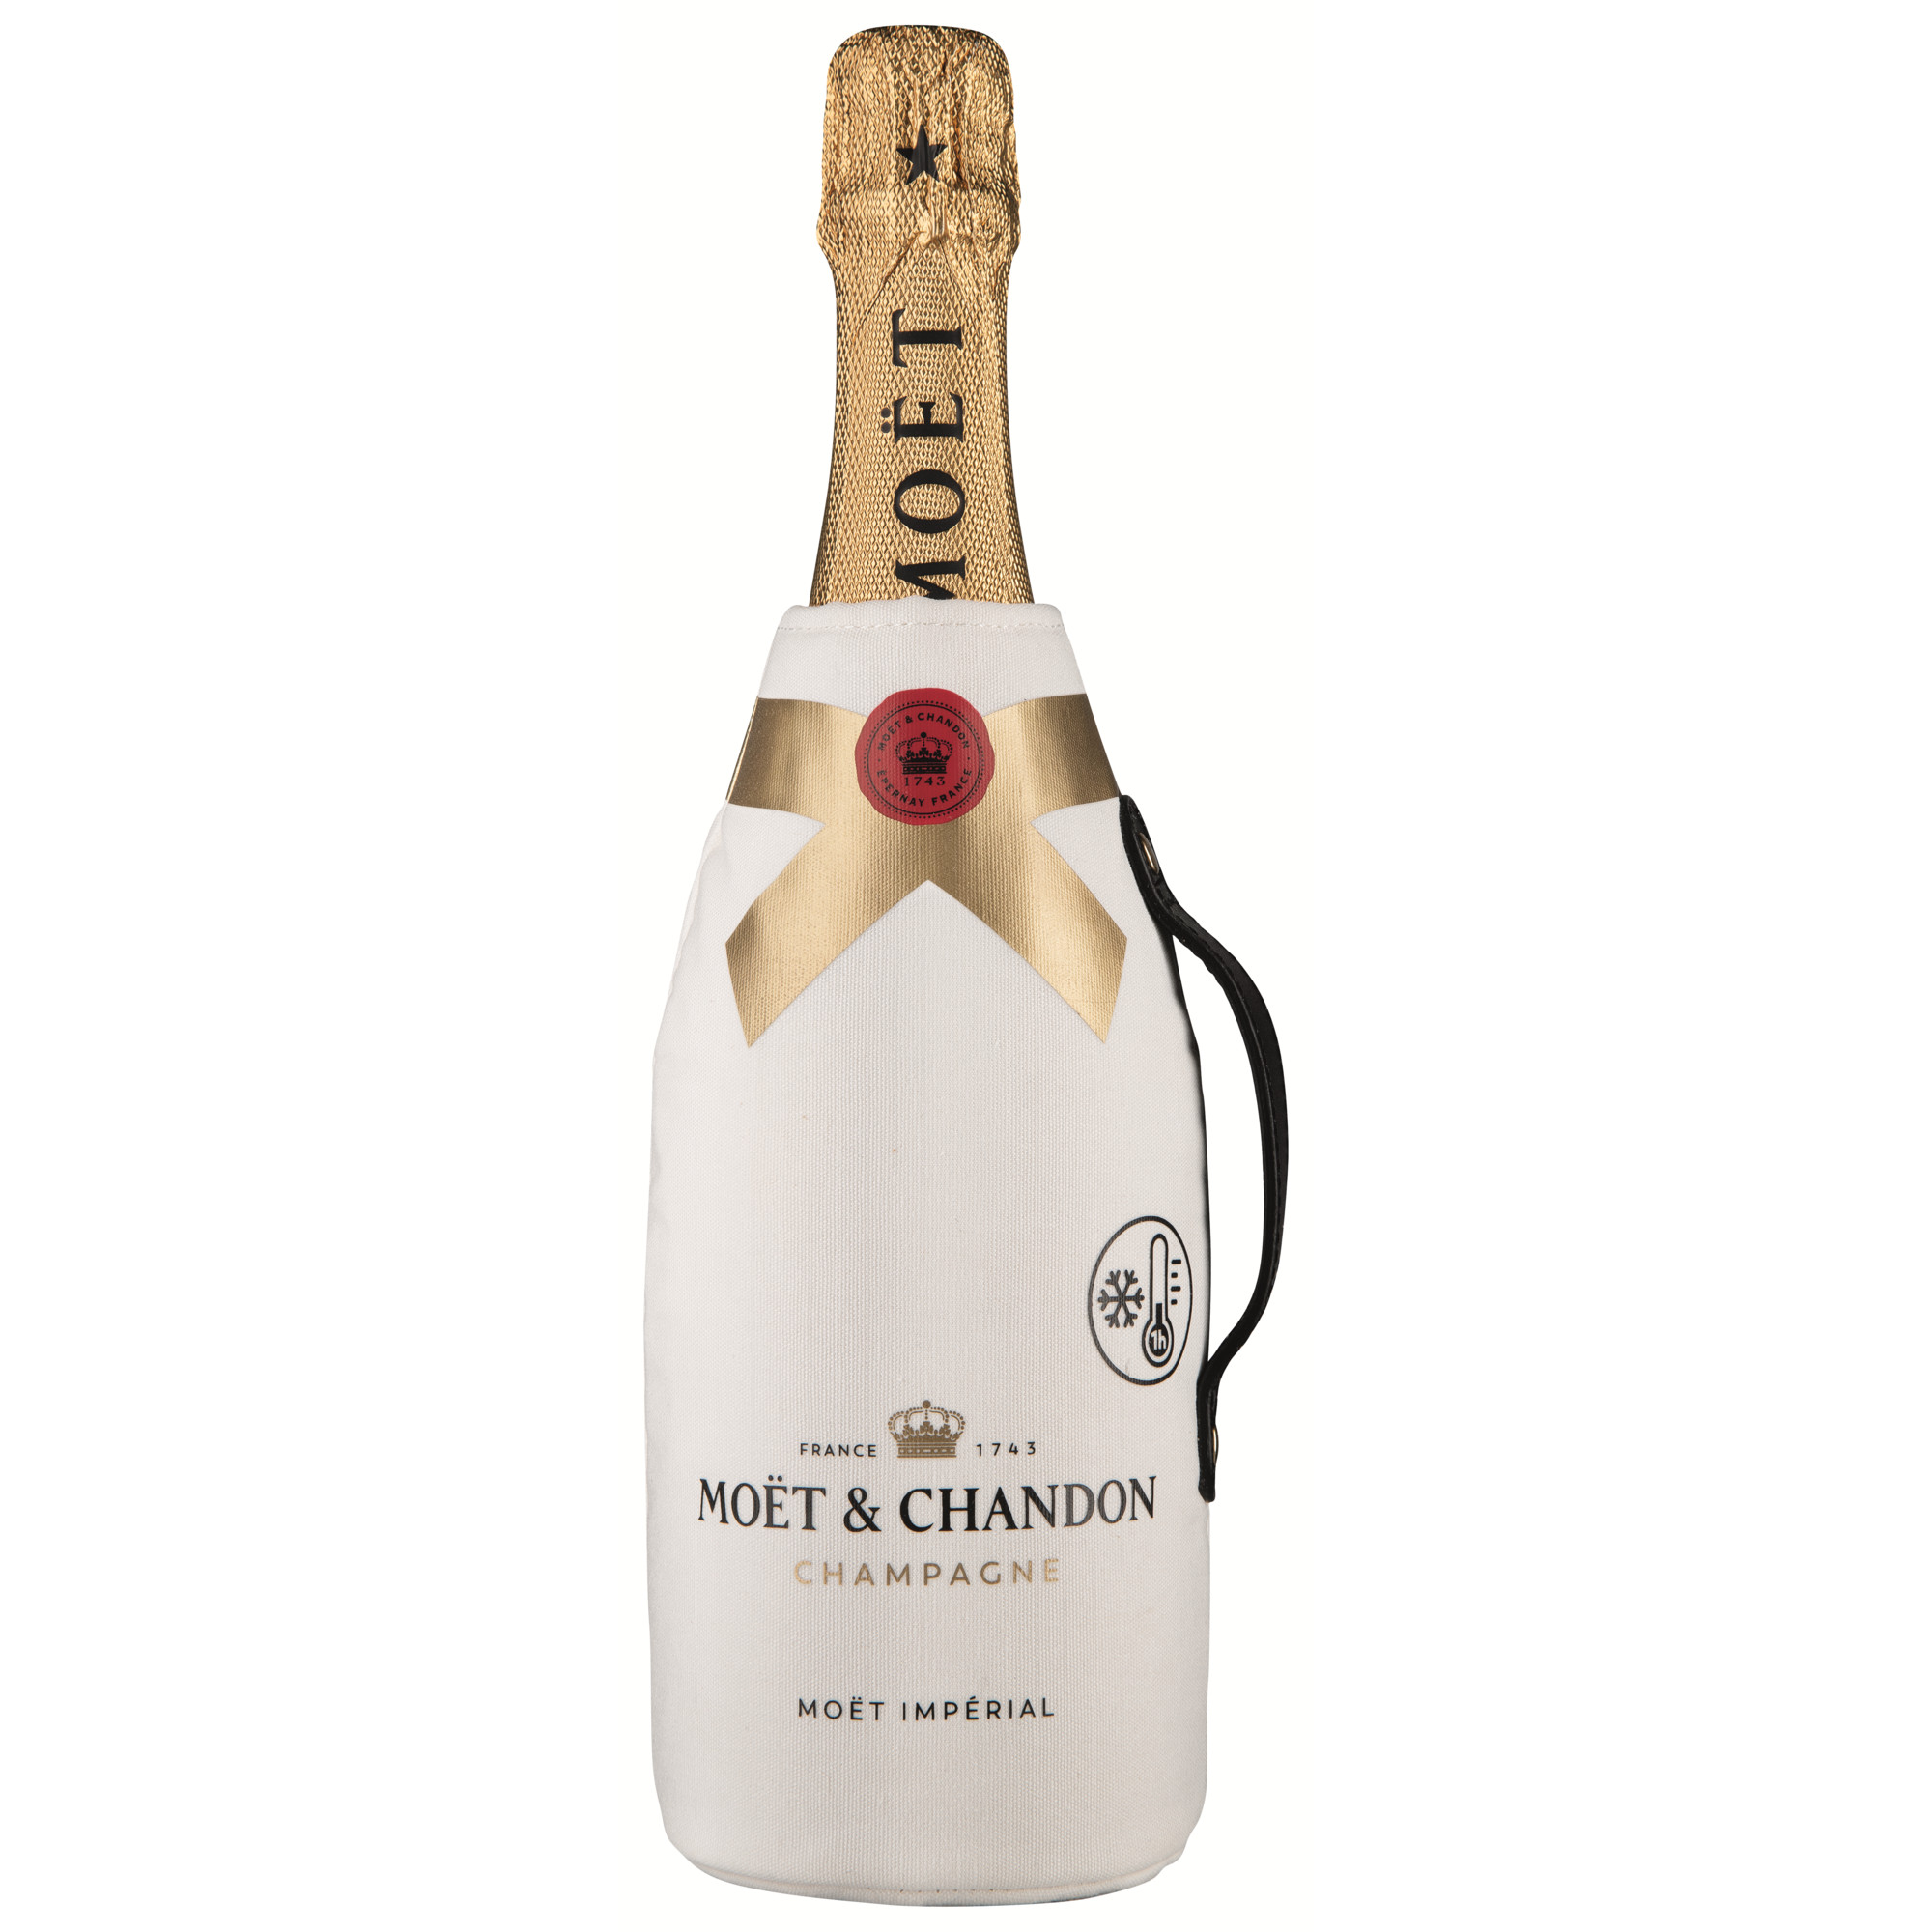 Champagne Moet & Chandon Imperial Ice Jacket, Brut, Champagne AC, Champagne, Schaumwein  Champagner Hawesko